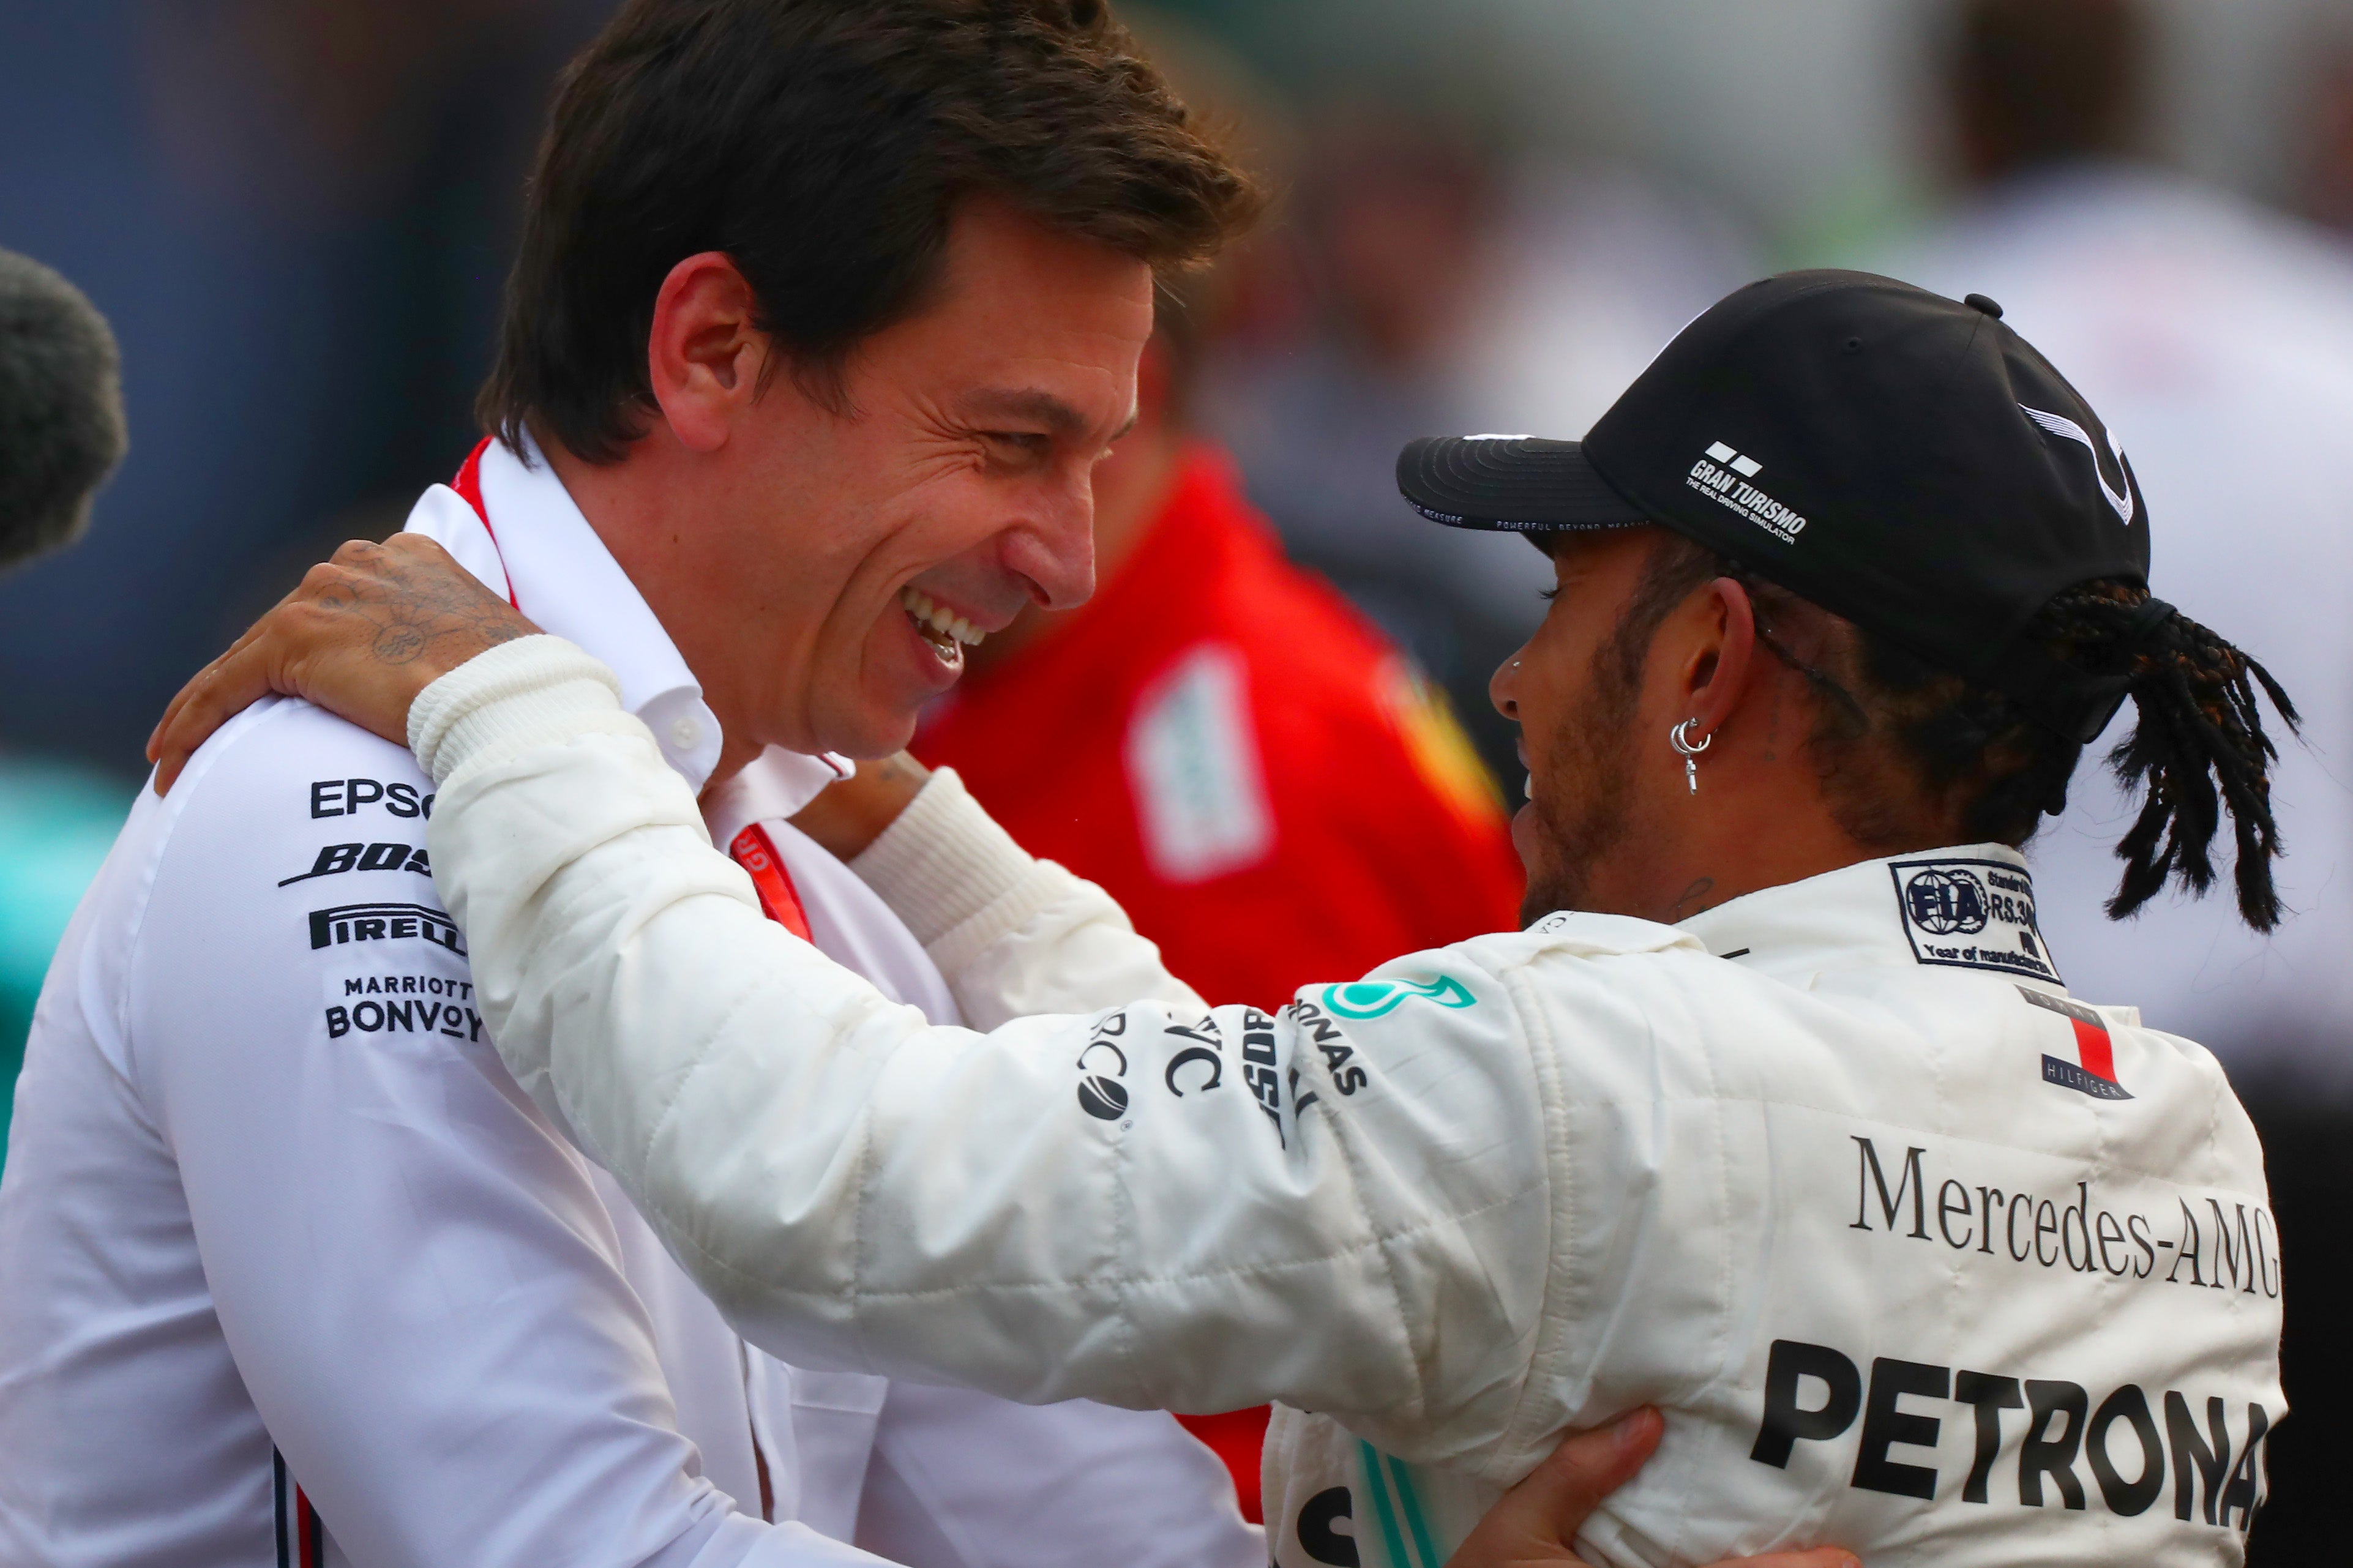 Hamilwon has worked with Toto Wolff for 11 years at Mercedes